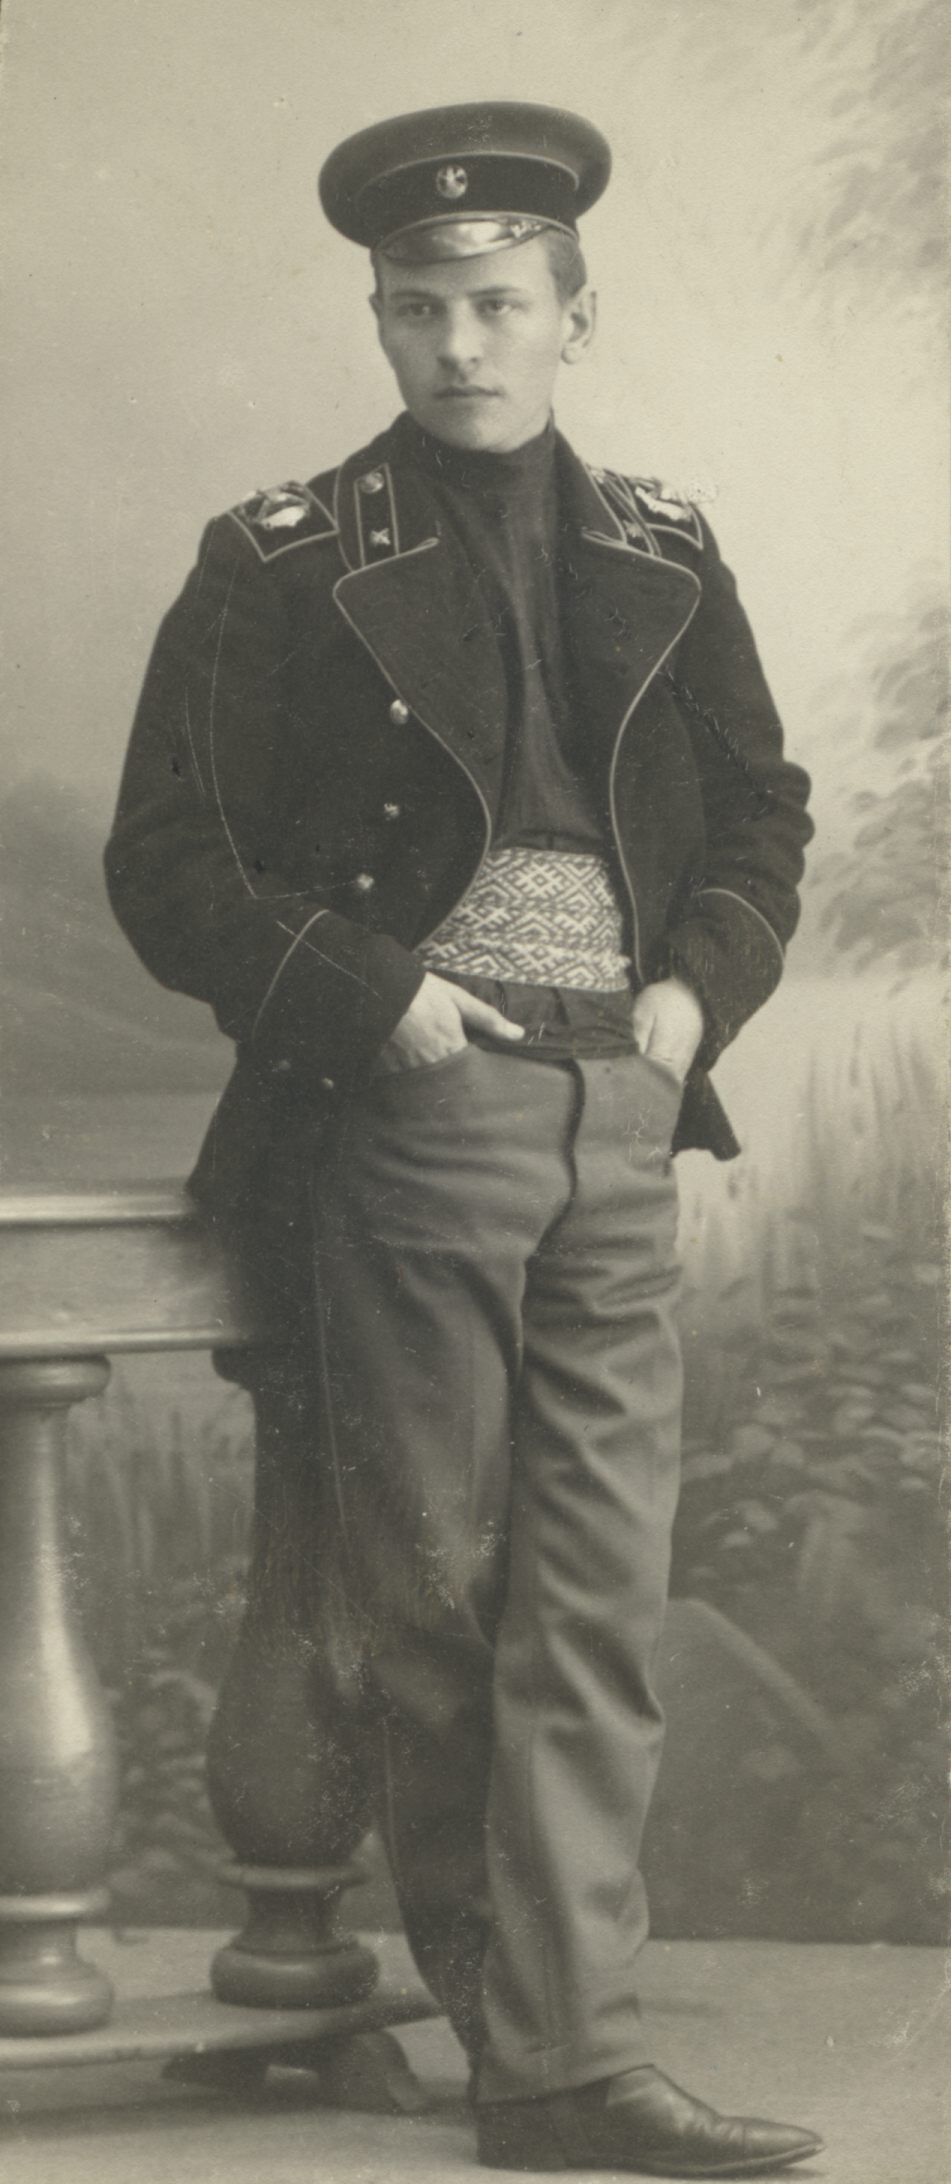 Artur Adson as a student of the Long Country School (approx. 17 years old)